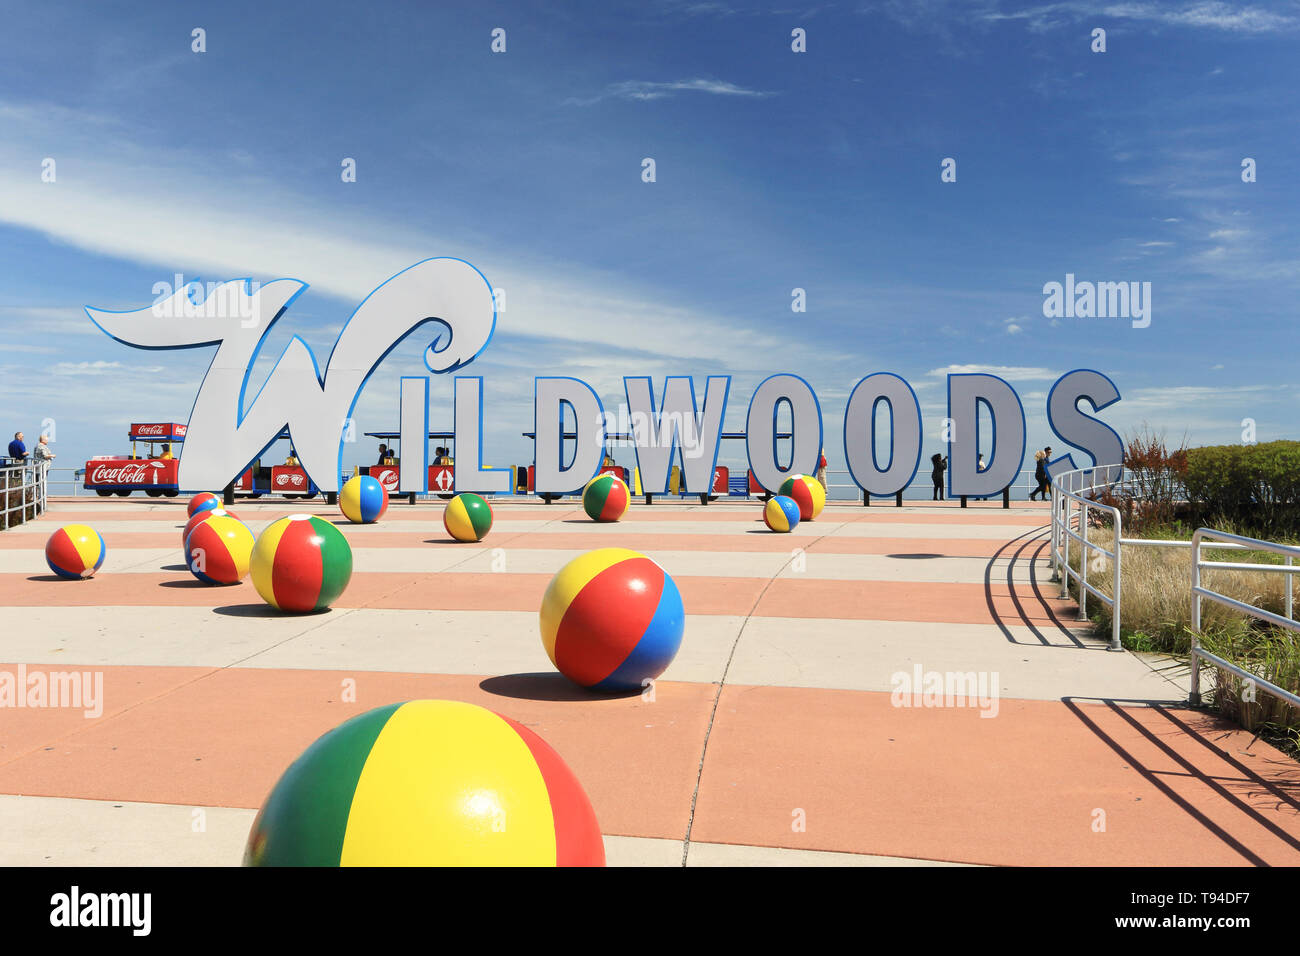 The Wildwoods Sign welcoming travelers to the resort cities of Wildwood, Wildwood Crest and North Wildwood, New Jersey, USA.The Tram Car in behind Stock Photo